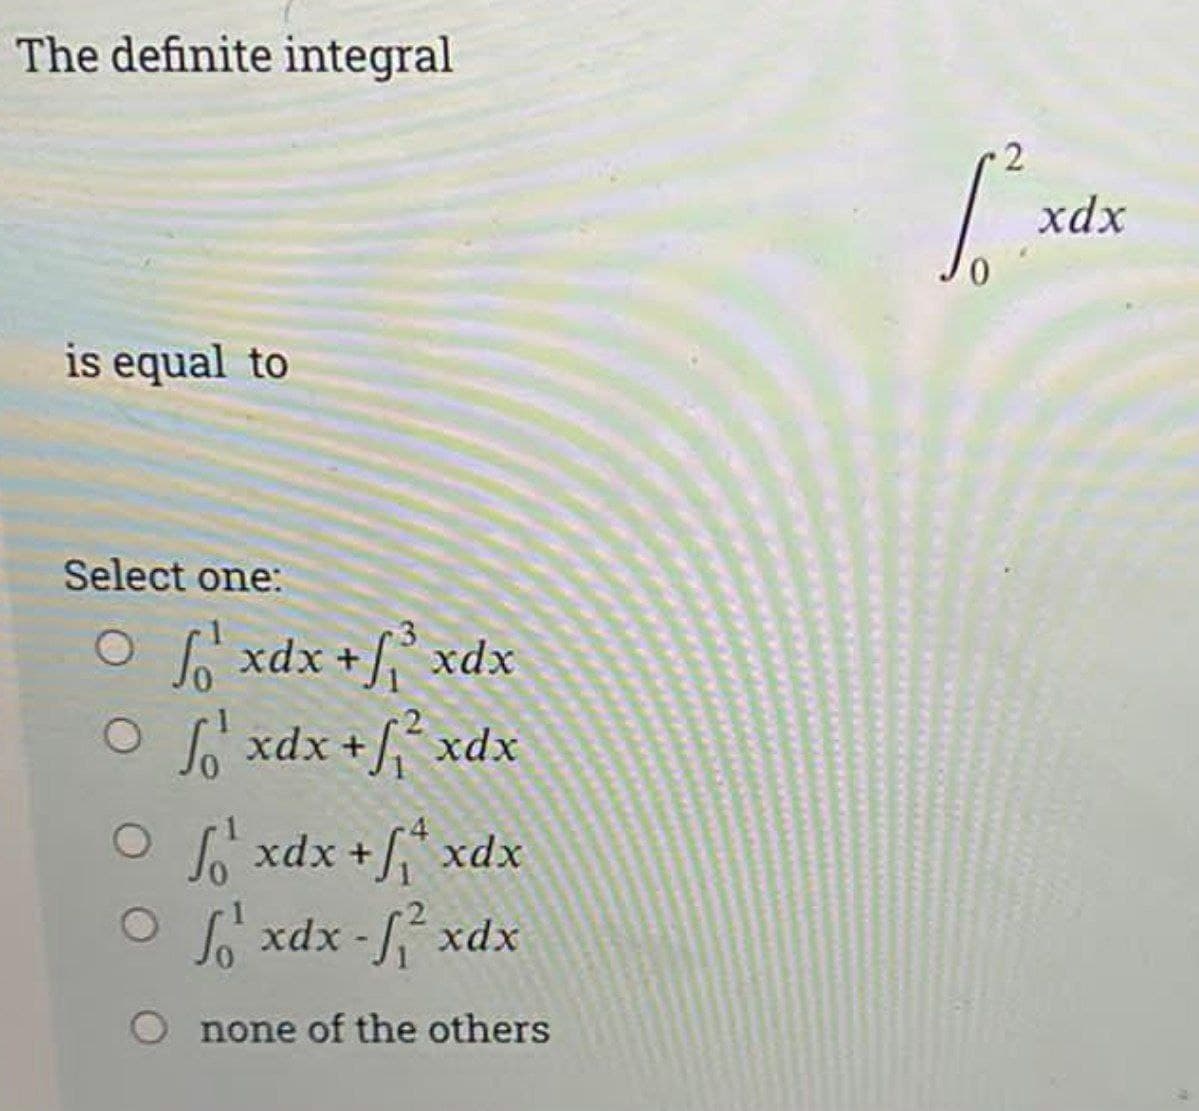 The definite integral
is equal to
Select one:
lò xác thỉ xác
Of xdx + ² xdx
Of xdx +
xdx
Of xdx -f² xdx
O none of the others
xdx